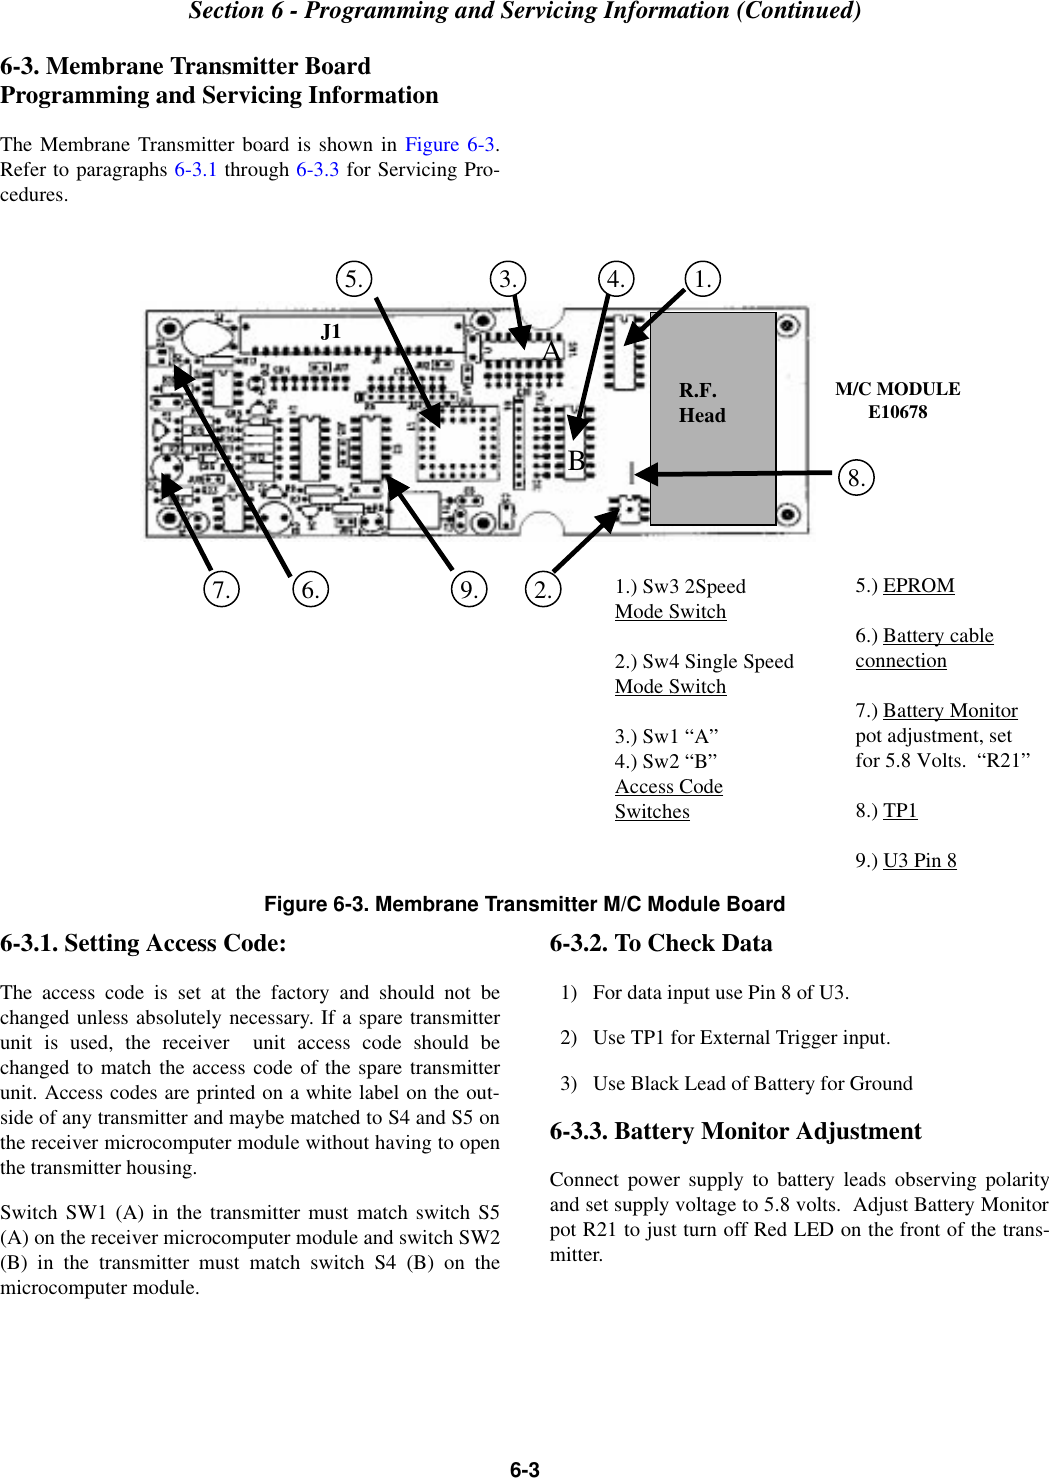 Section 6 - Programming and Servicing Information (Continued)6-36-3. Membrane Transmitter Board Programming and Servicing InformationThe Membrane Transmitter board is shown in Figure 6-3.Refer to paragraphs 6-3.1 through 6-3.3 for Servicing Pro-cedures.Figure 6-3. Membrane Transmitter M/C Module Board6-3.1. Setting Access Code:The access code is set at the factory and should not bechanged unless absolutely necessary. If a spare transmitterunit is used, the receiver  unit access code should bechanged to match the access code of the spare transmitterunit. Access codes are printed on a white label on the out-side of any transmitter and maybe matched to S4 and S5 onthe receiver microcomputer module without having to openthe transmitter housing. Switch SW1 (A) in the transmitter must match switch S5(A) on the receiver microcomputer module and switch SW2(B) in the transmitter must match switch S4 (B) on themicrocomputer module.6-3.2. To Check Data  1)   For data input use Pin 8 of U3.  2)   Use TP1 for External Trigger input.  3)   Use Black Lead of Battery for Ground6-3.3. Battery Monitor AdjustmentConnect power supply to battery leads observing polarityand set supply voltage to 5.8 volts.  Adjust Battery Monitorpot R21 to just turn off Red LED on the front of the trans-mitter.R.F.HeadJ1M/C MODULEE106781.) Sw3 2SpeedMode Switch2.) Sw4 Single SpeedMode Switch3.) Sw1 “A”4.) Sw2 “B”Access CodeSwitches5.) EPROM6.) Battery cableconnection7.) Battery Monitorpot adjustment, setfor 5.8 Volts.  “R21”8.) TP19.) U3 Pin 81.2.3. 4.7. 6.5.9.8.AB